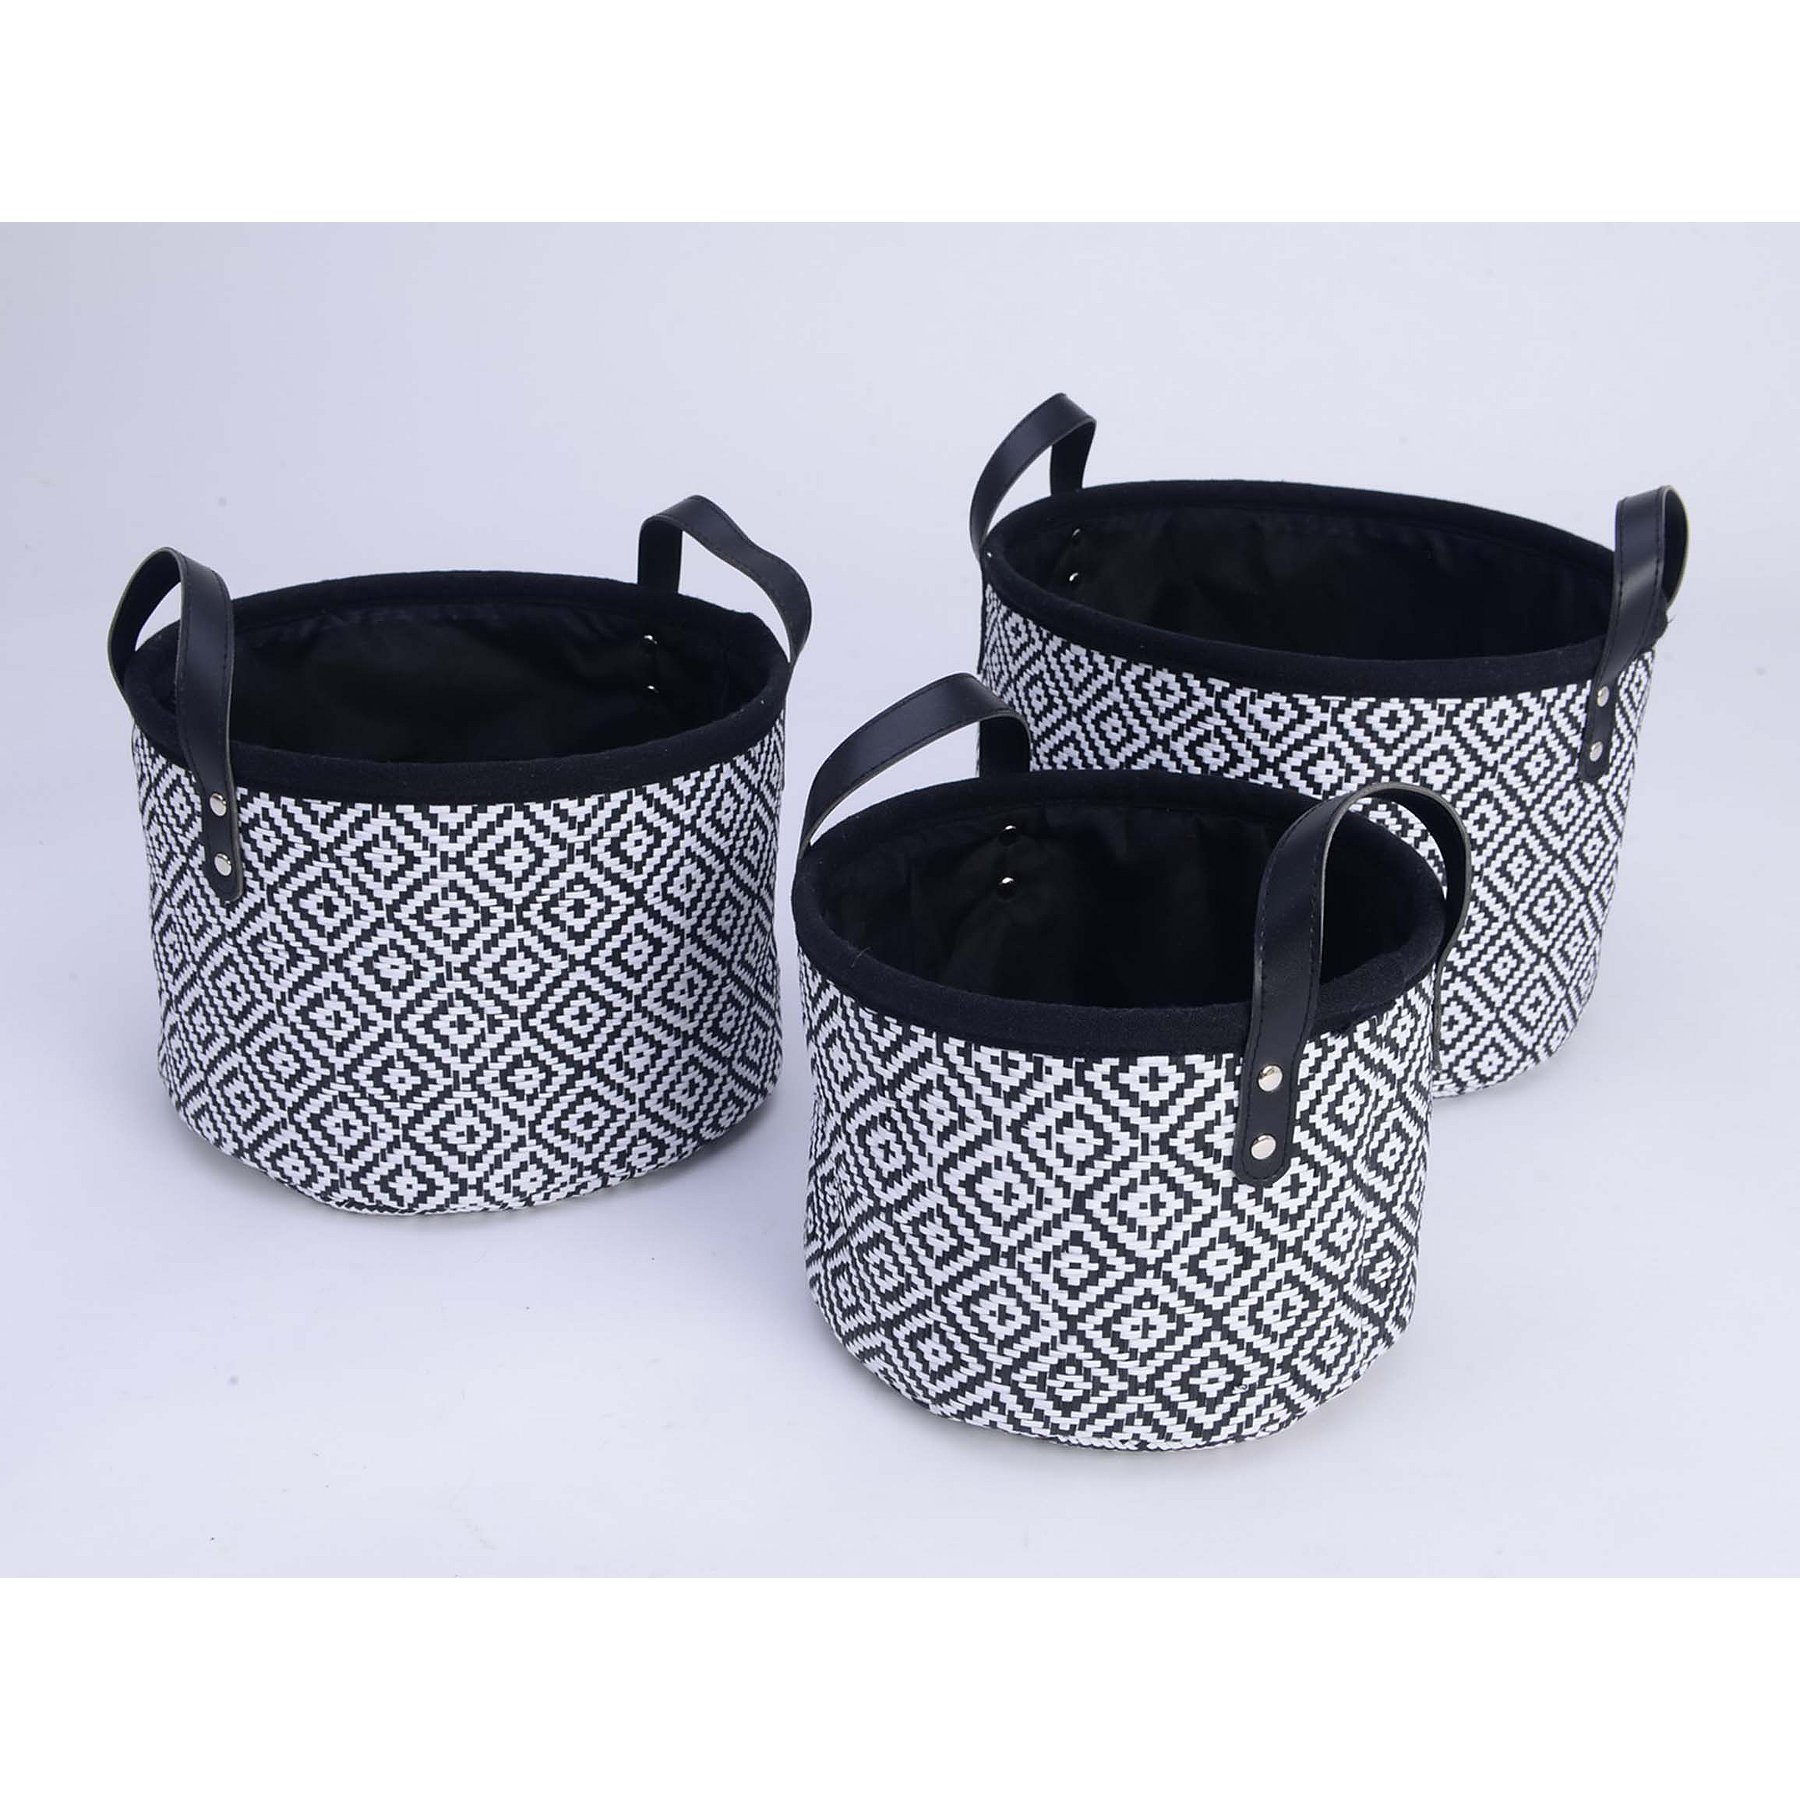 Black And White Straw Storage Baskets - Set of 3 | Home | George at ASDA